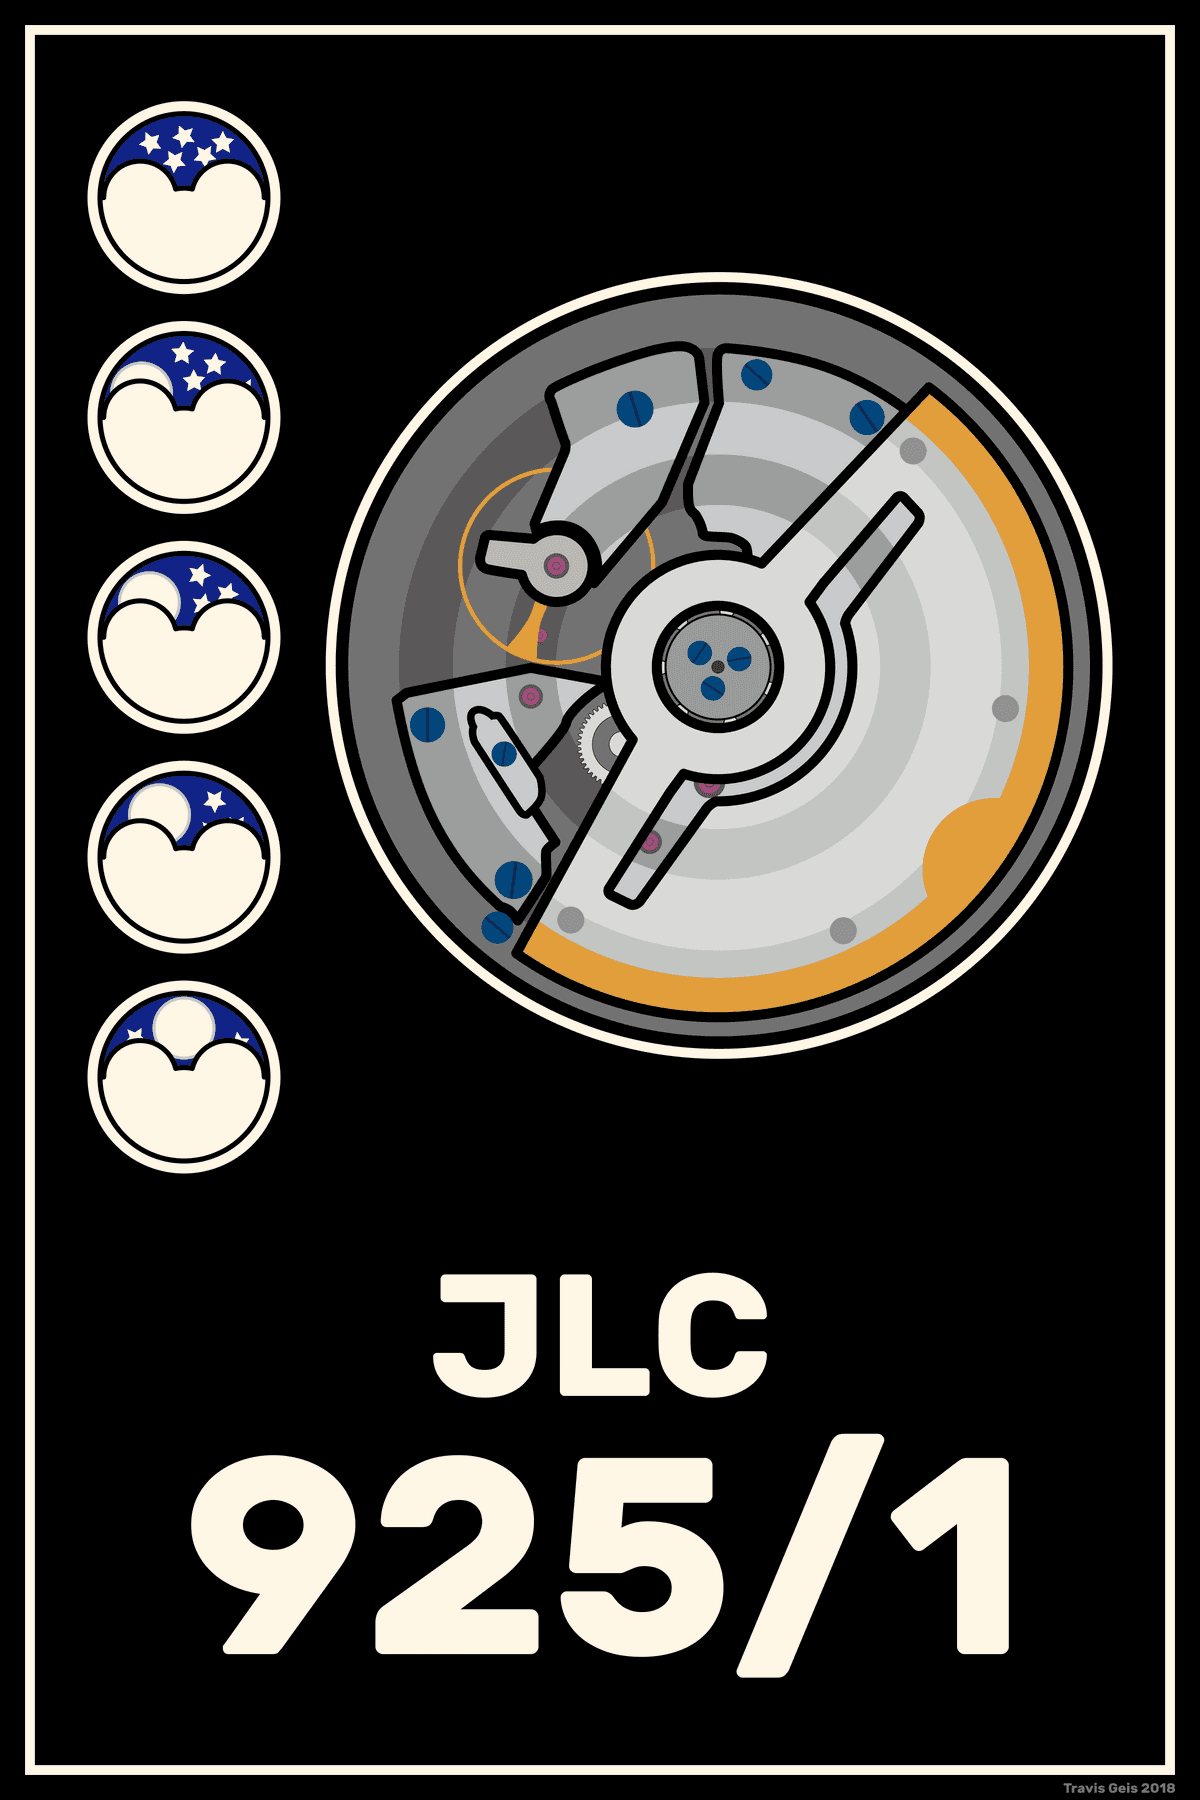 An art-deco-style poster of the JLC 925/1 watch movement.